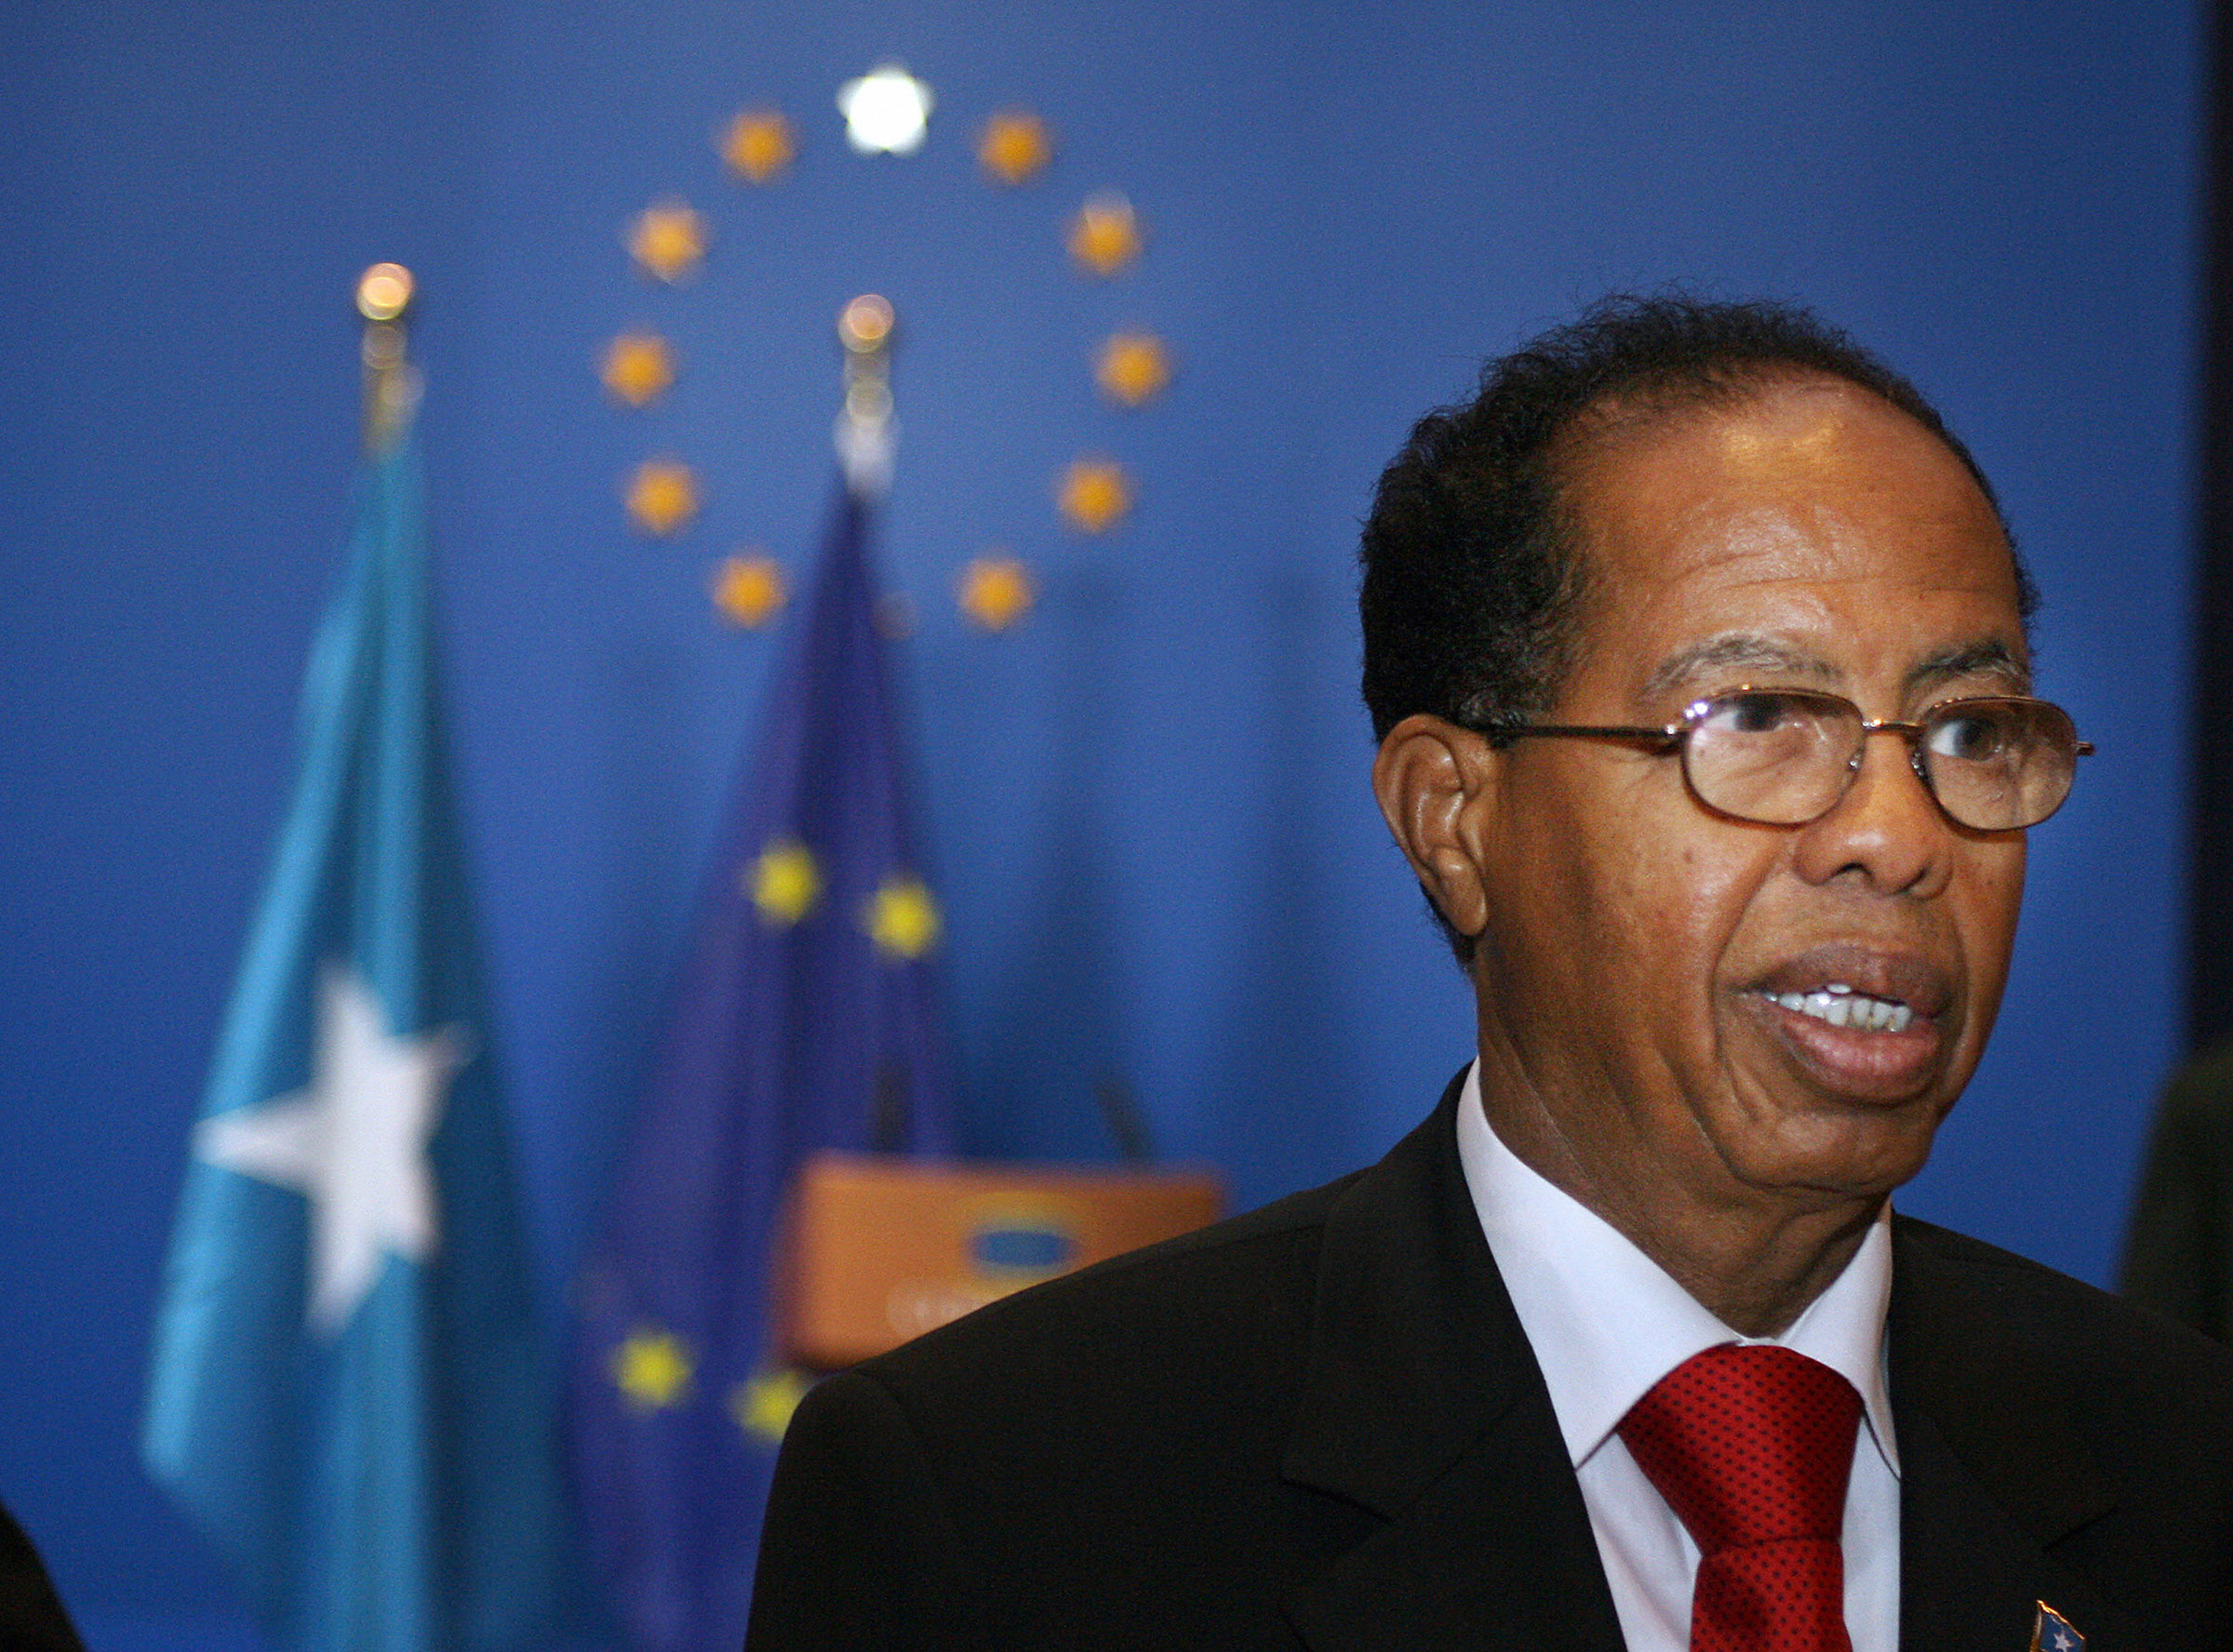 Somalian Prime Minister Nur Hassan Hussein in February 2008 (Dominique Faget—AFP/Getty Images)